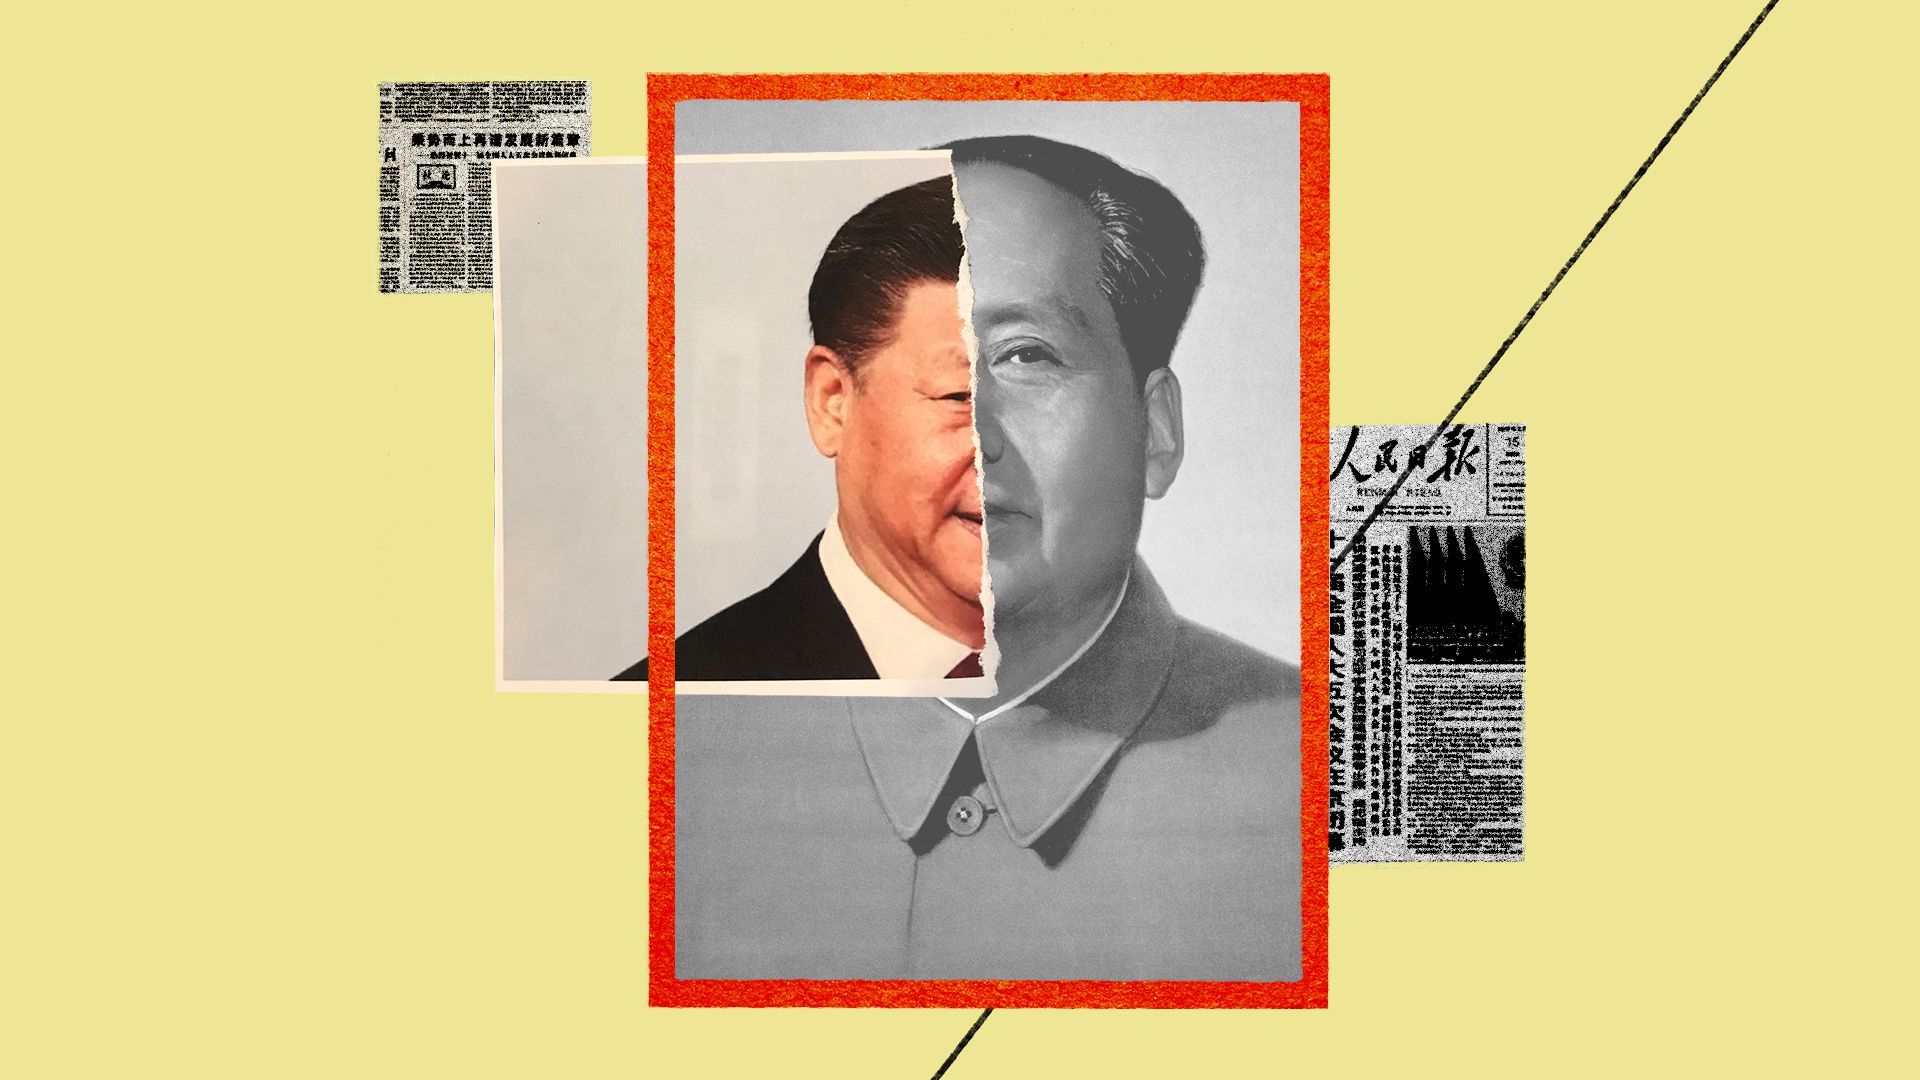 Illustration of Mao and Xi photos merged in a collage together